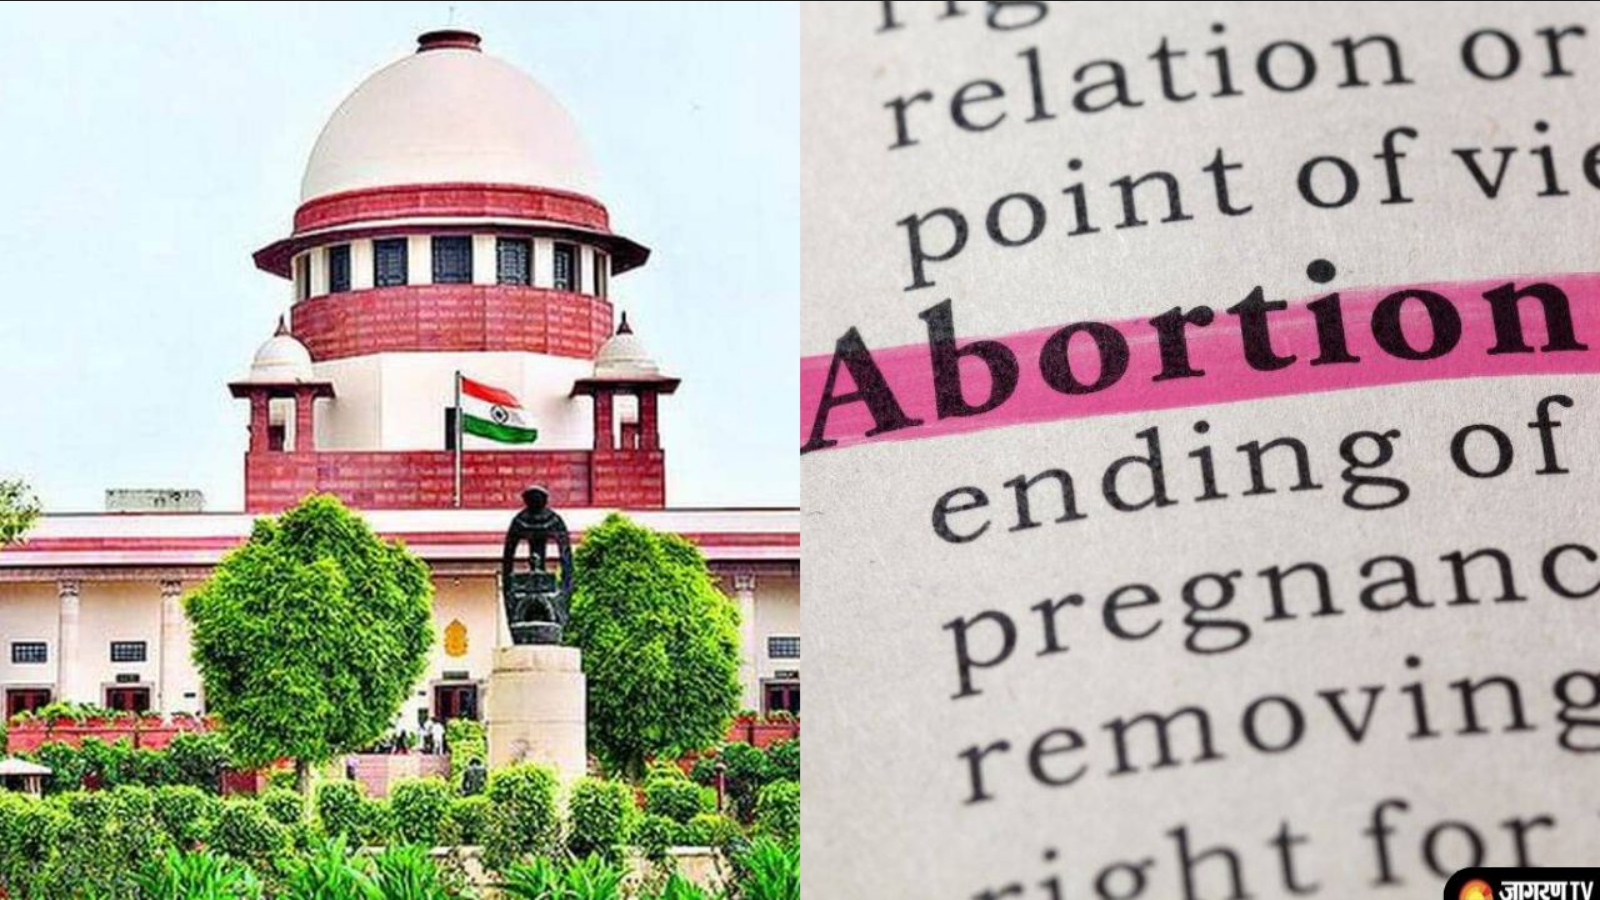 Even single, unmarried women have the right to safe and legal abortion, rules SC